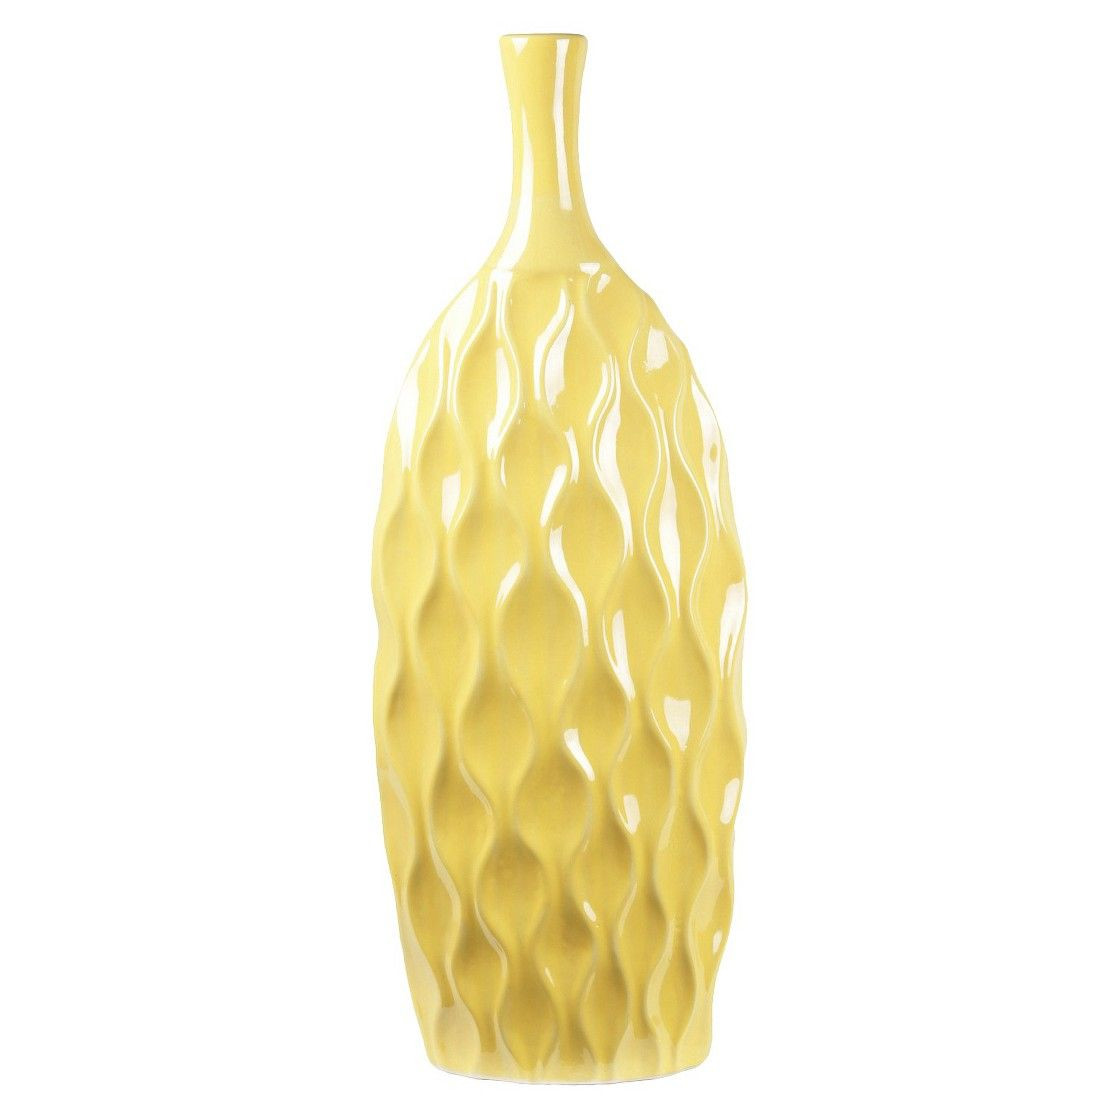 26 Lovable Moroccan Ceramic Vase 2024 free download moroccan ceramic vase of 39 99 19 5 ceramic vase yellow chic design on a dime inside 39 99 19 5 ceramic vase yellow